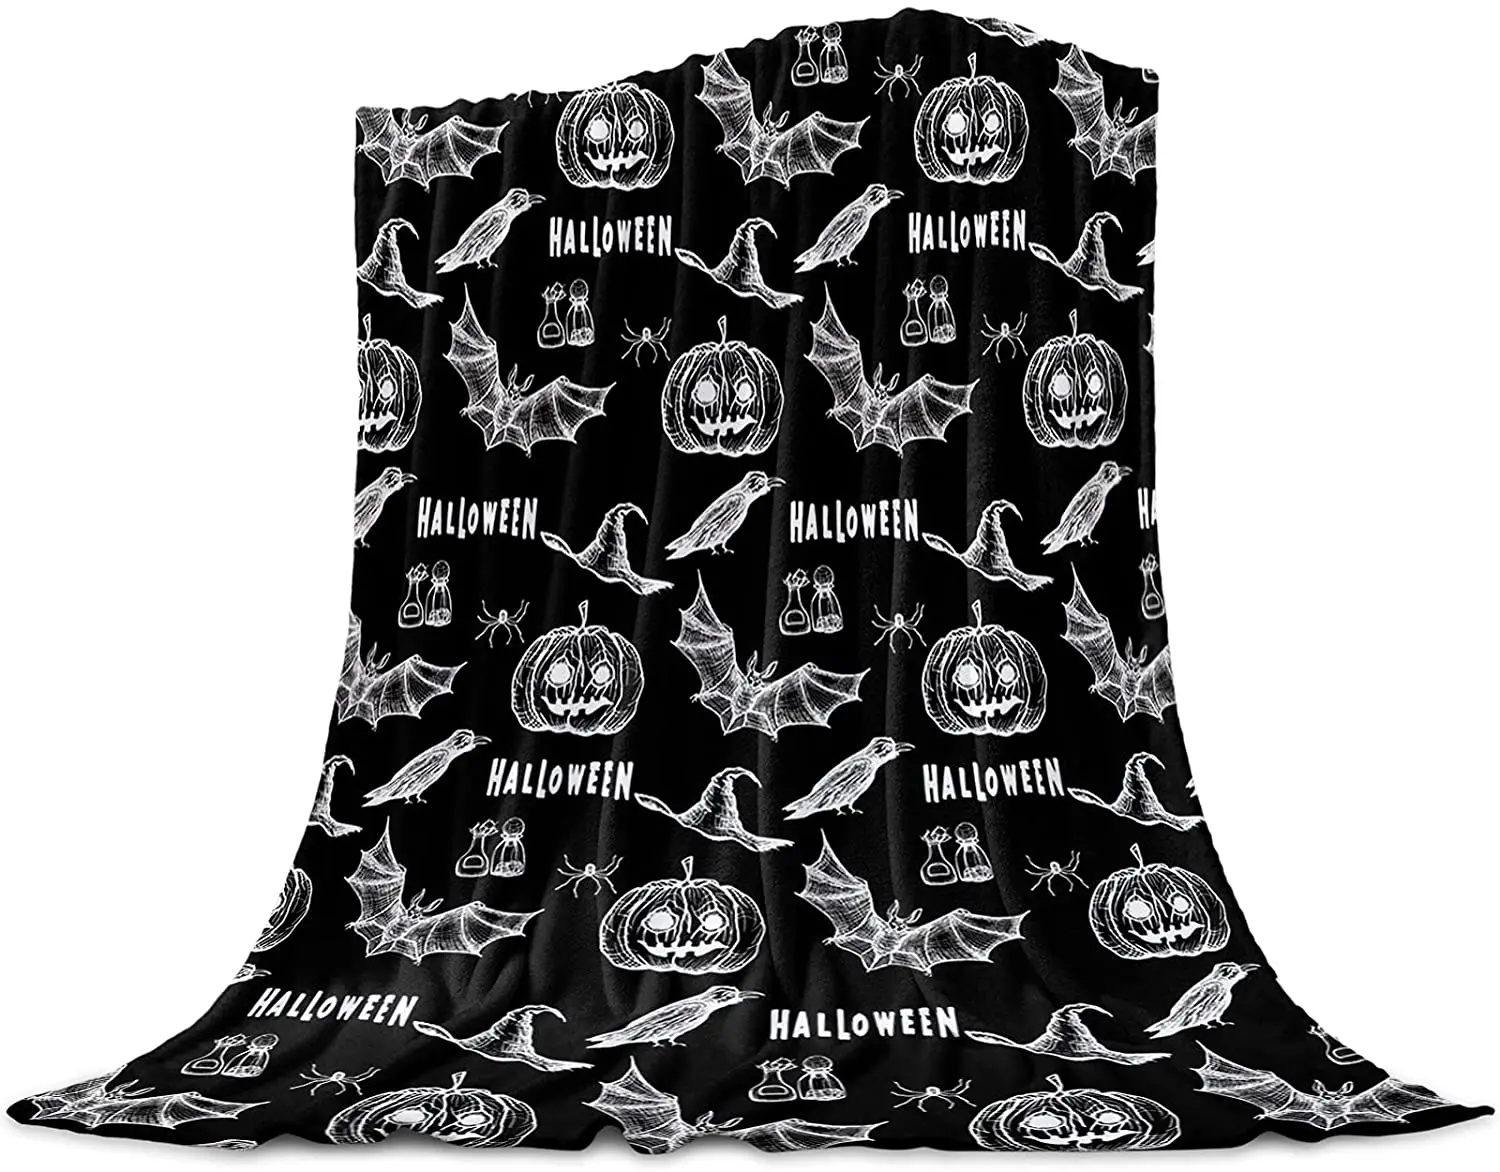 

Flannel Blankets and Throws for Couch Bed, Super Soft Cozy Lightweight Plush Throw Blanket,Halloween Pumpkin Bat Black Hallowmas